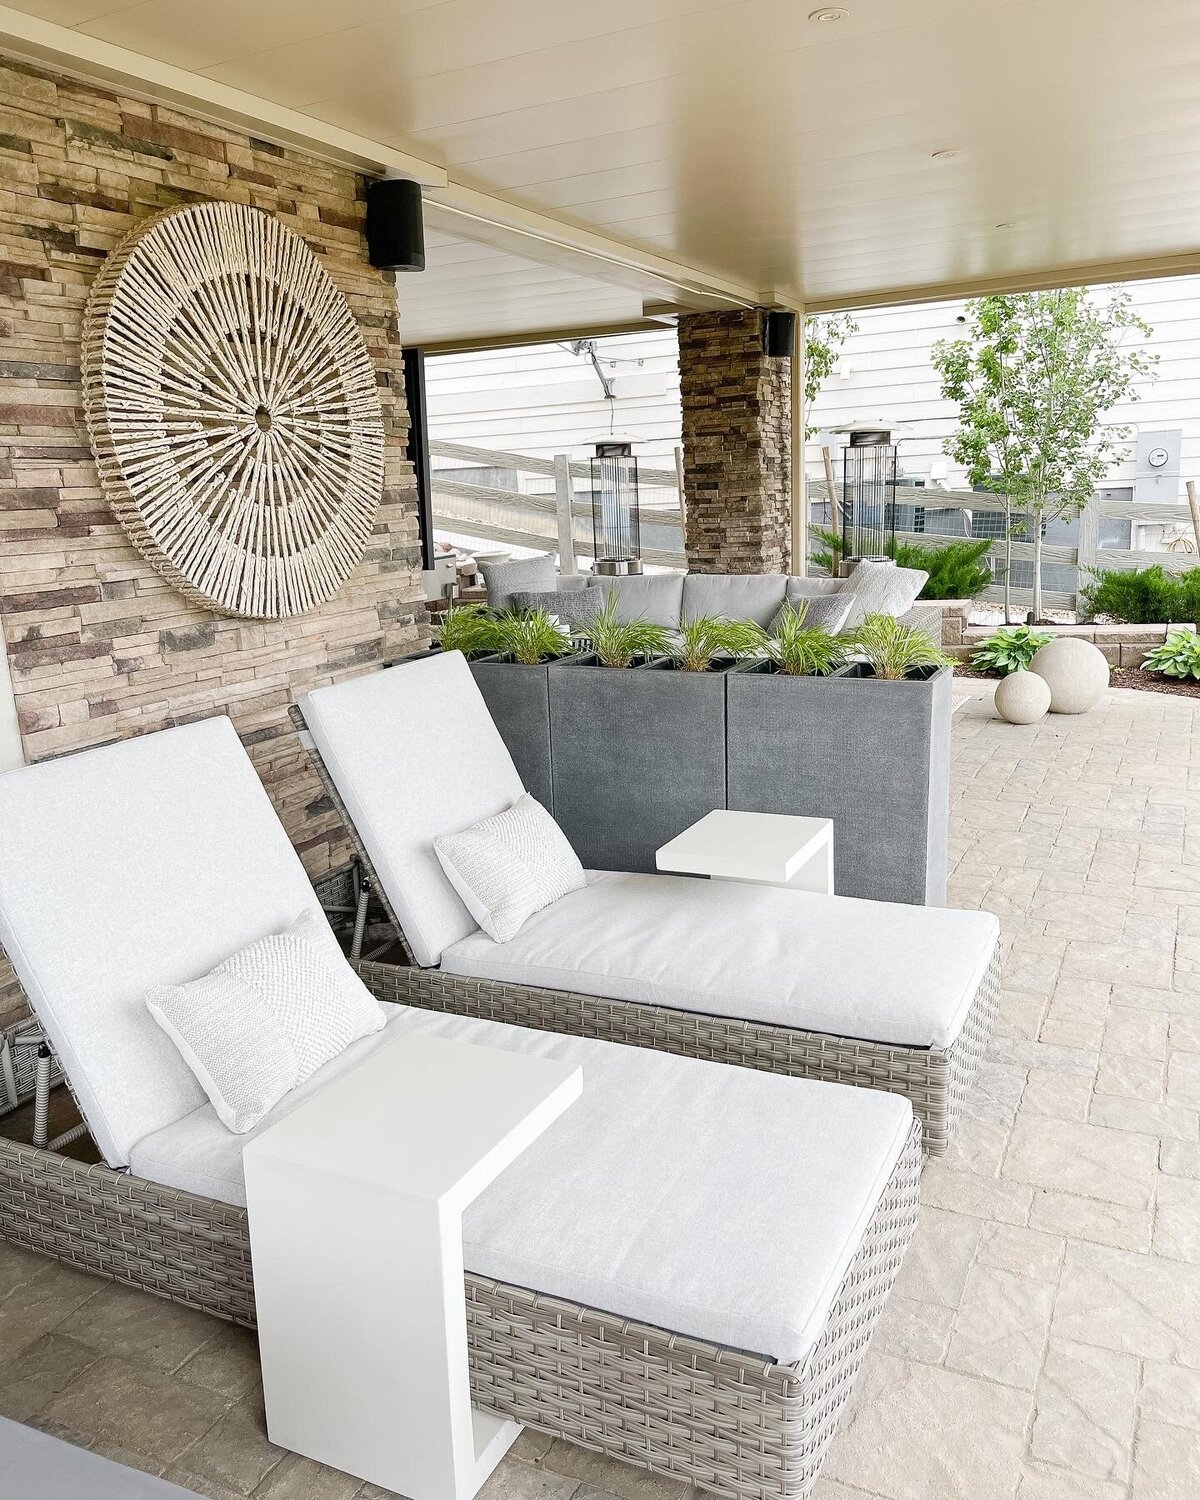 Chaise Lounge Chairs / Colorado Outdoor Living / Teak and Amber Interiors